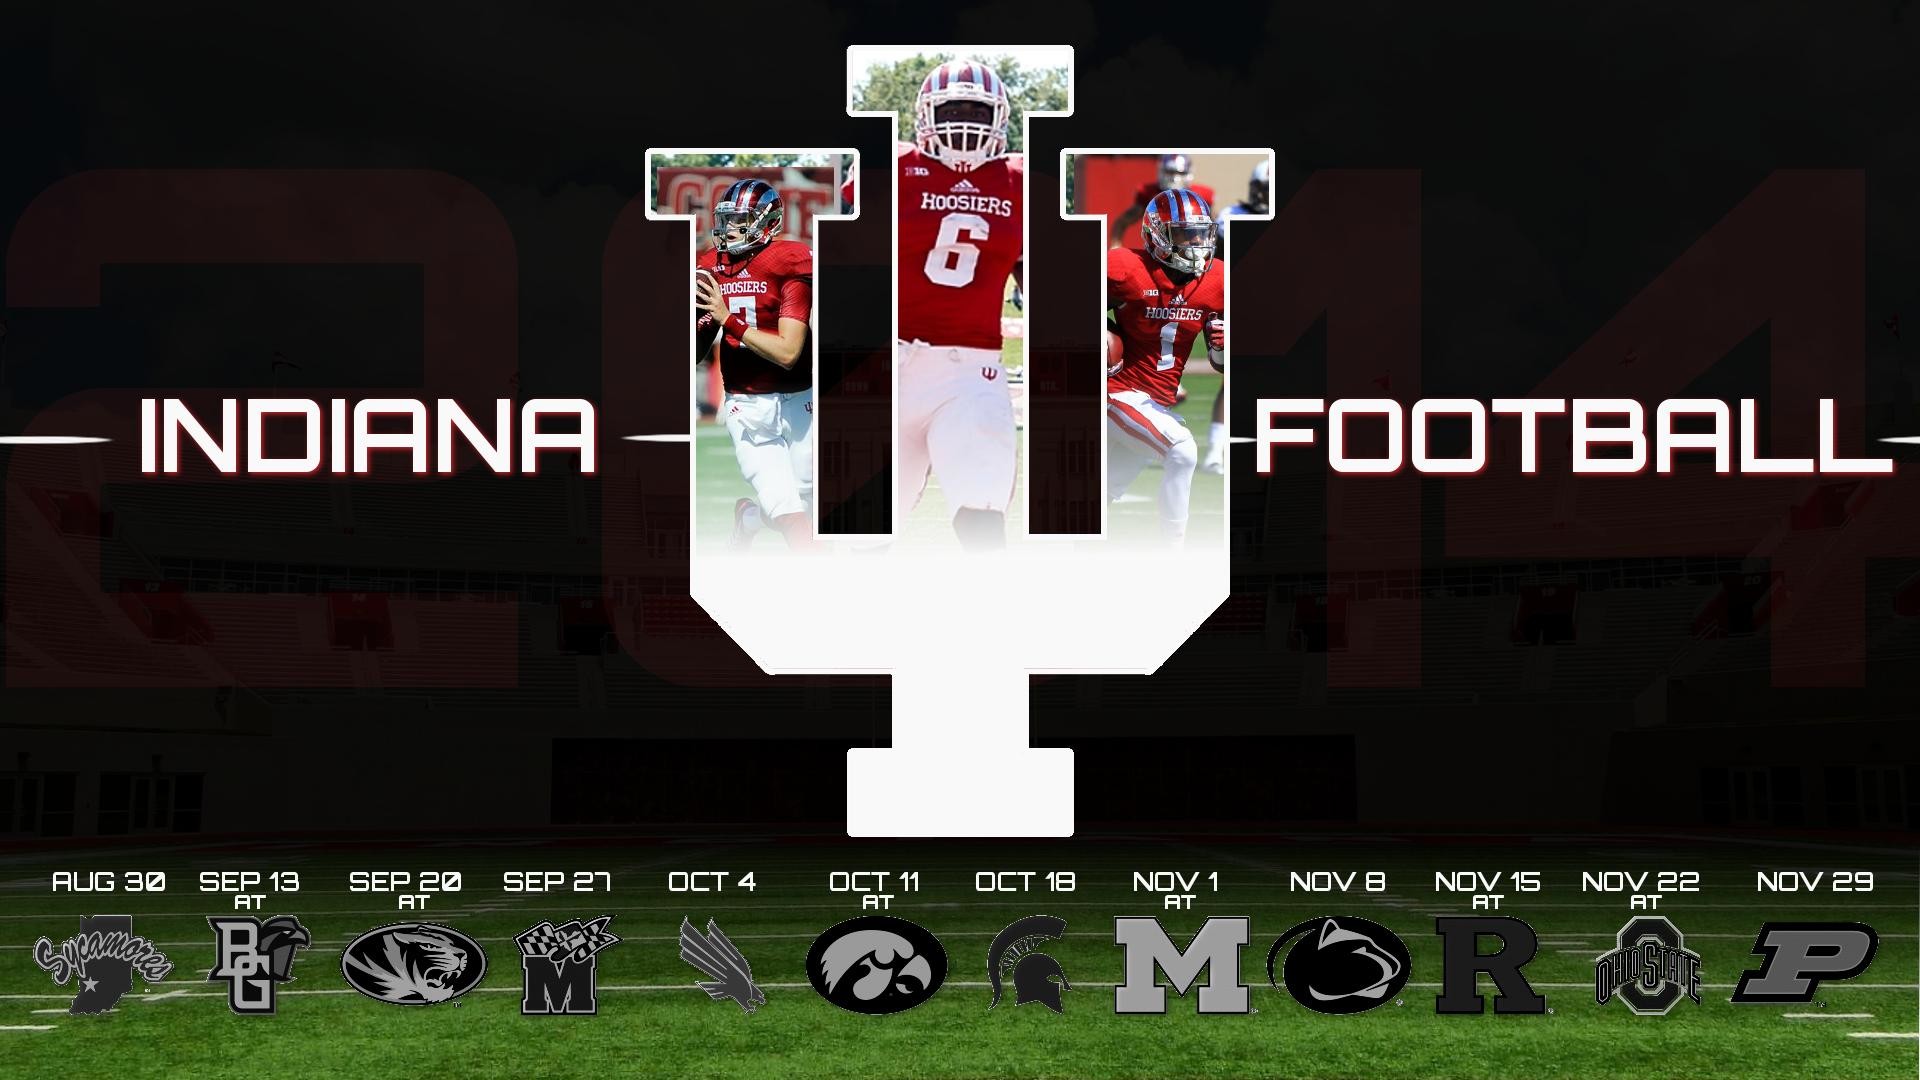 1920x1080 2014 IU Football Schedule Wallpaper (made by yours truly) ...